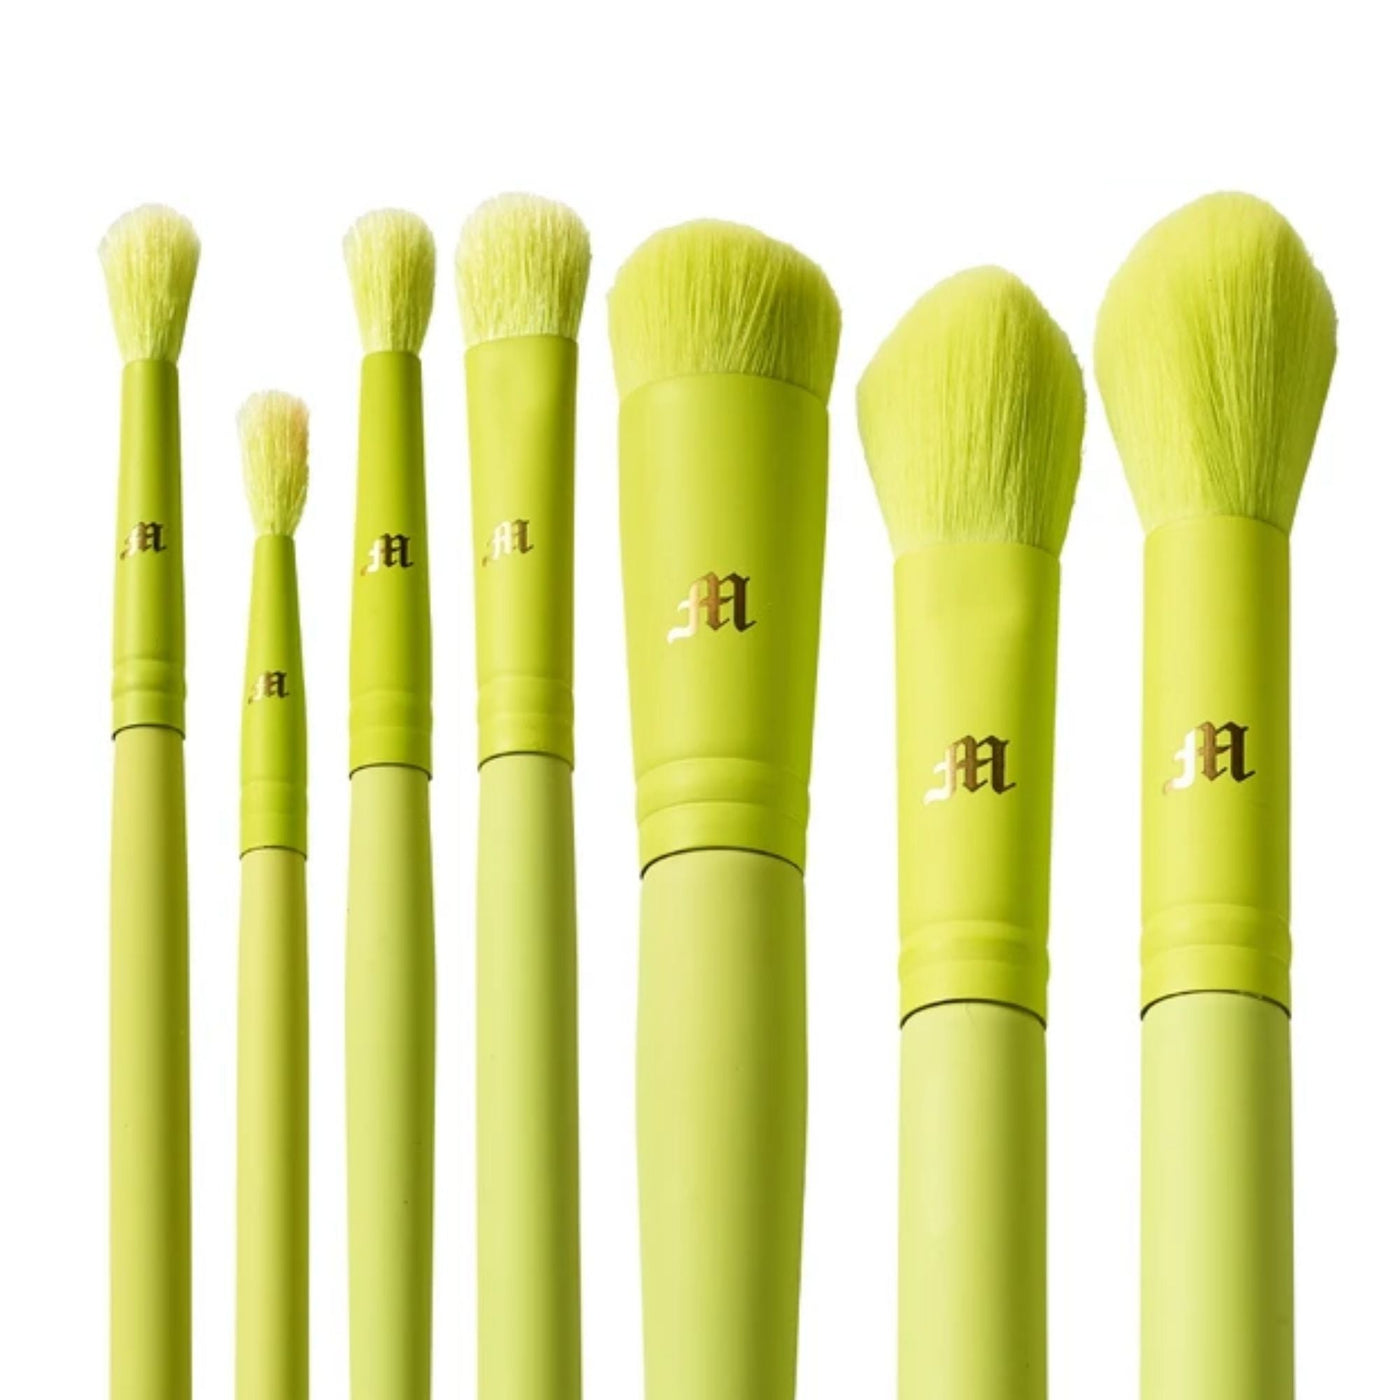 Made by Mitchell - Original 7 Piece Brush Collection